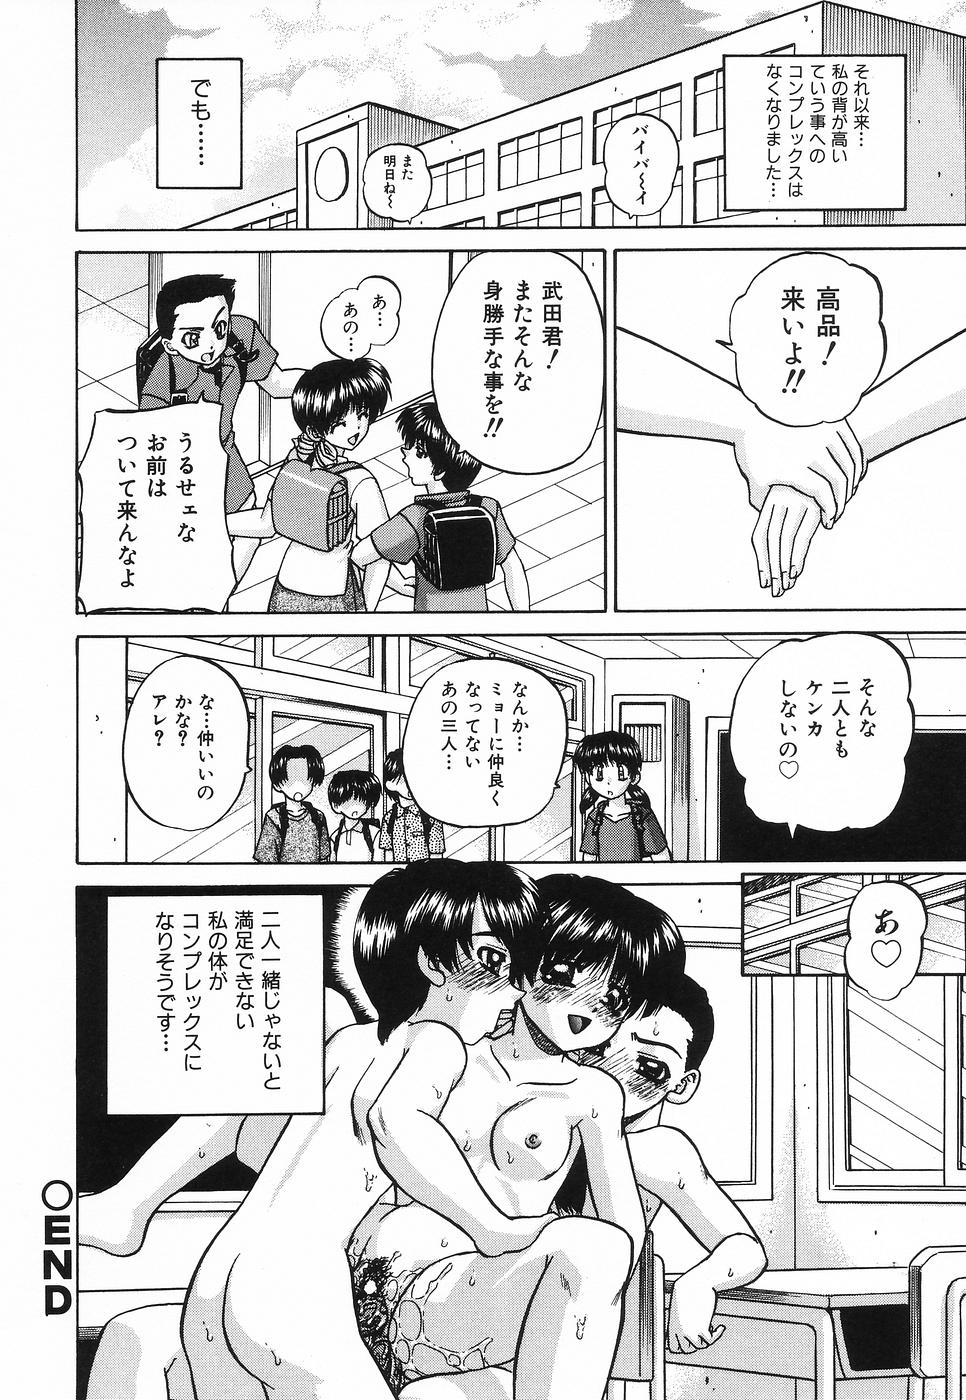 [Chunrouzan] Hime Hajime - First sexual intercourse in a New Year page 47 full